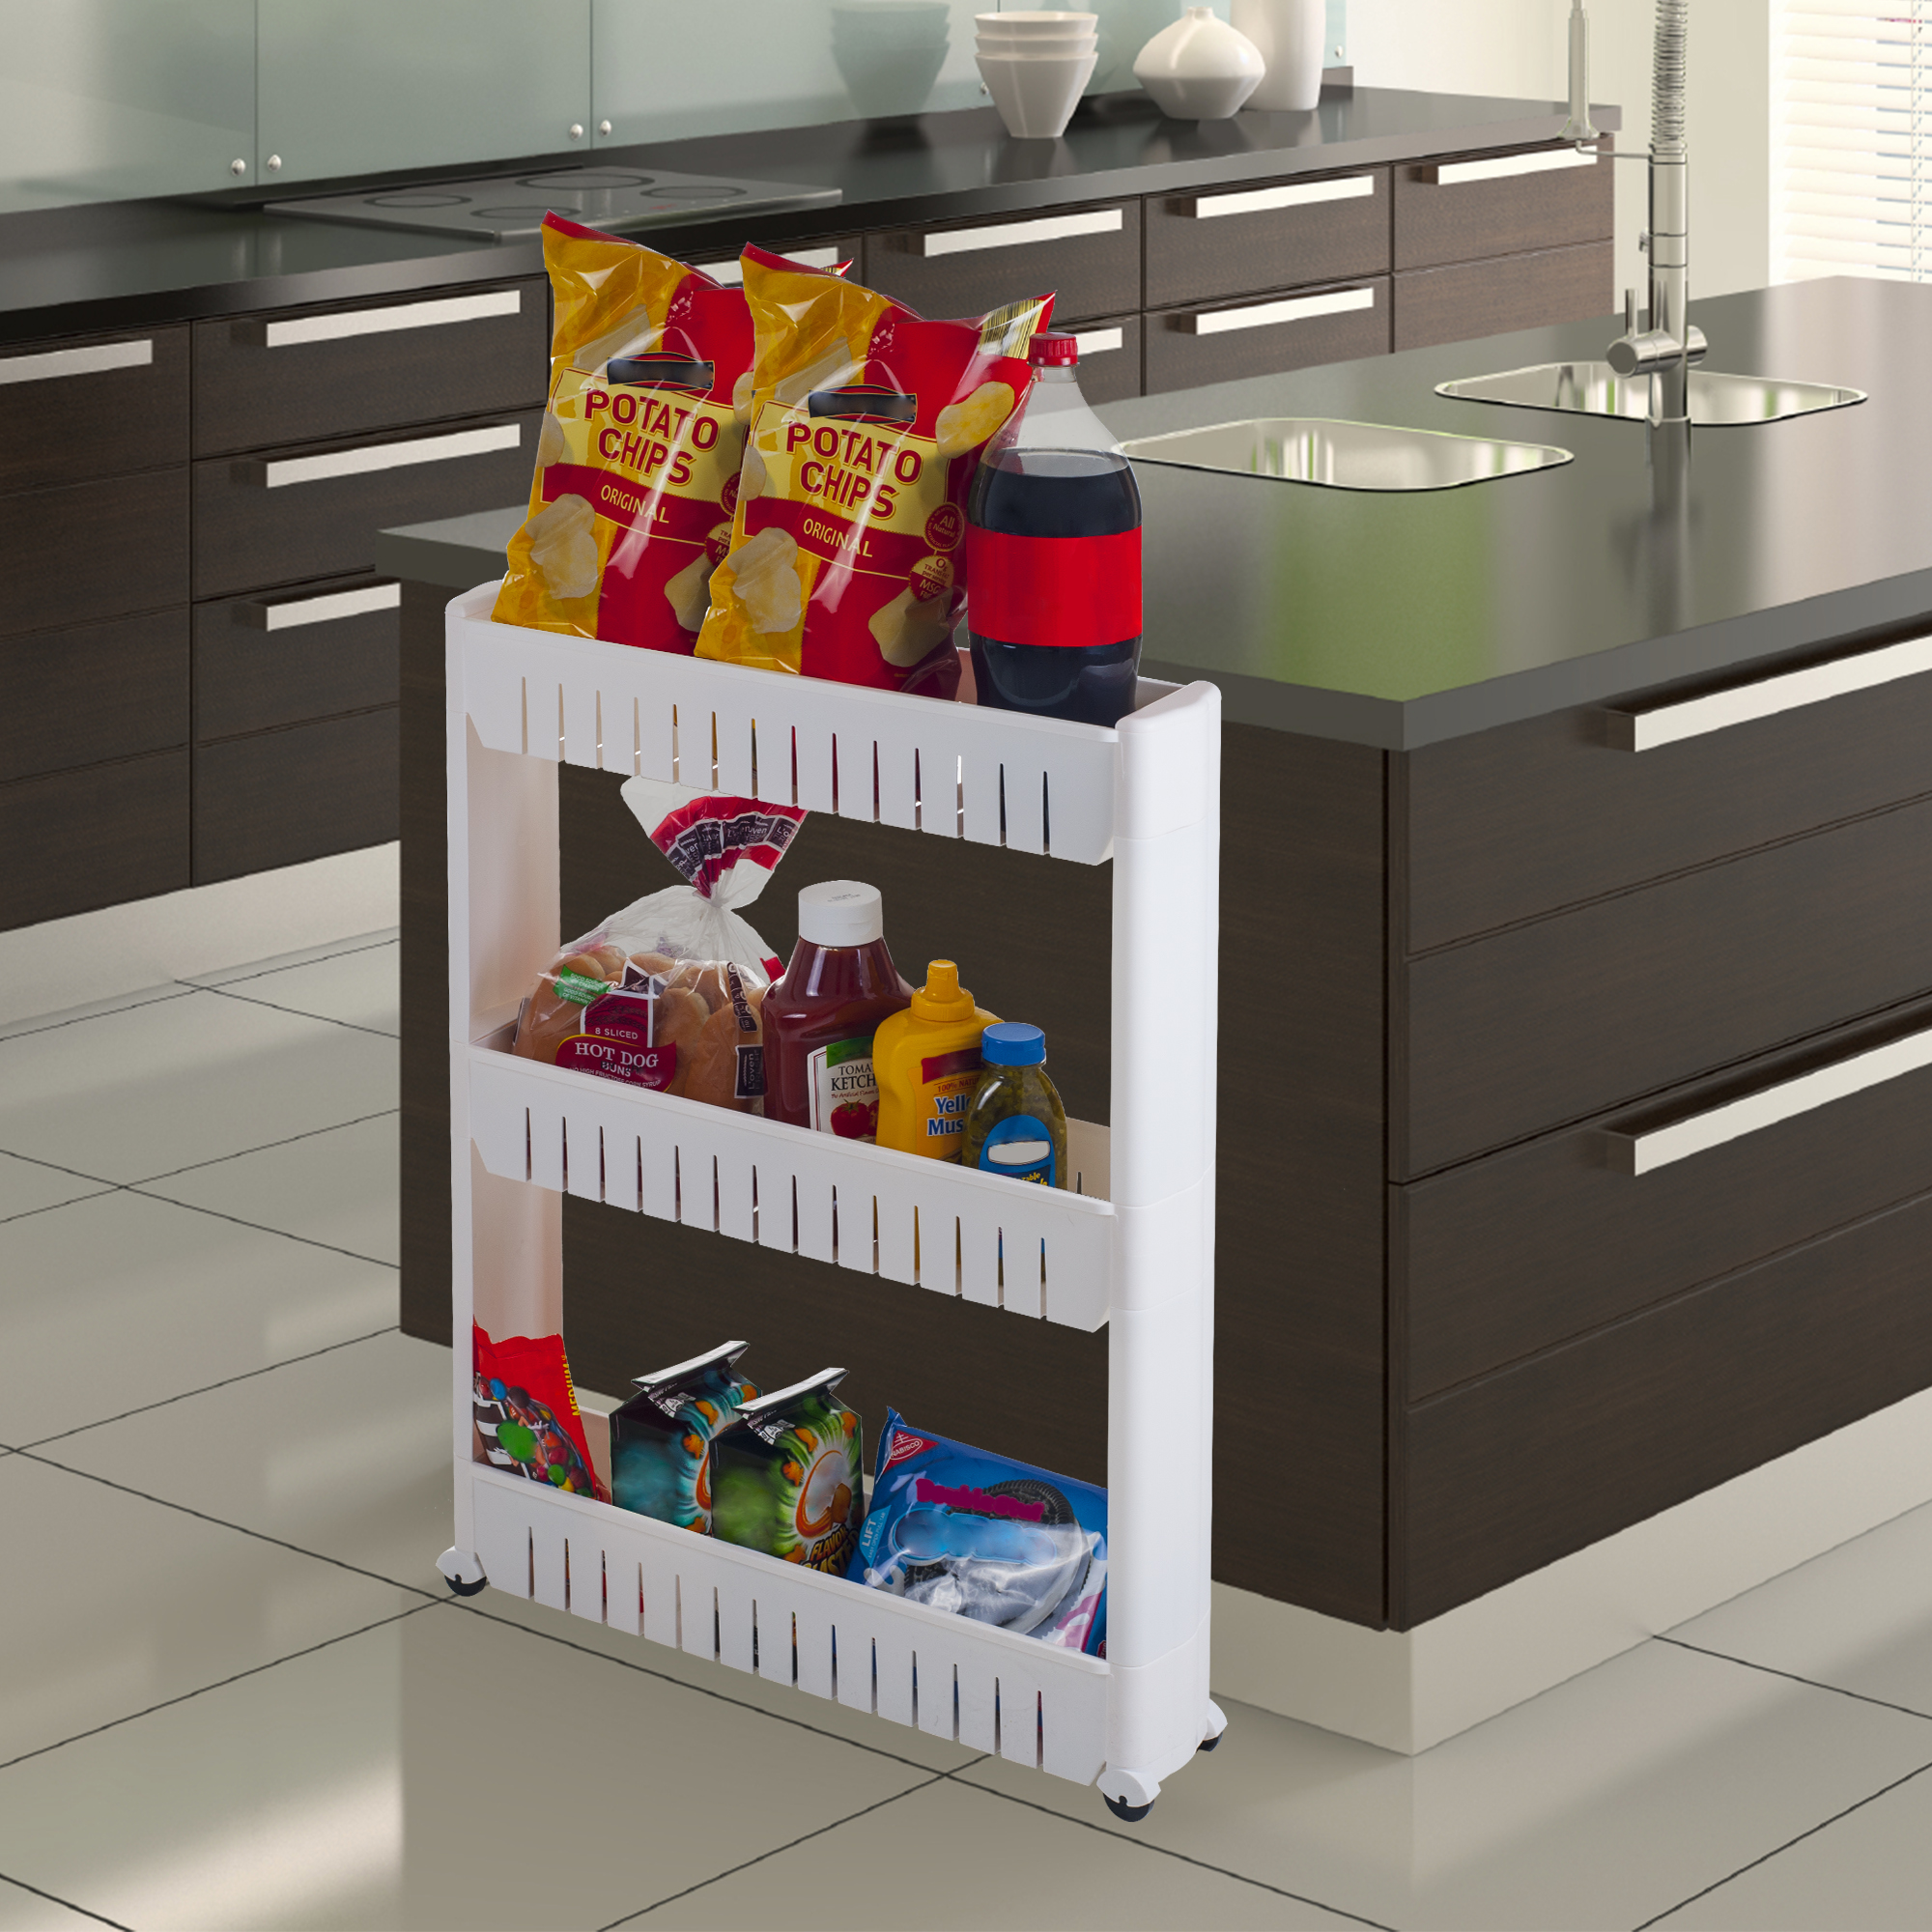 Everyday Home Portable Plastic Shelving Unit Organizer with 3 Large Storage Baskets, up to 100lb capacity - image 4 of 5